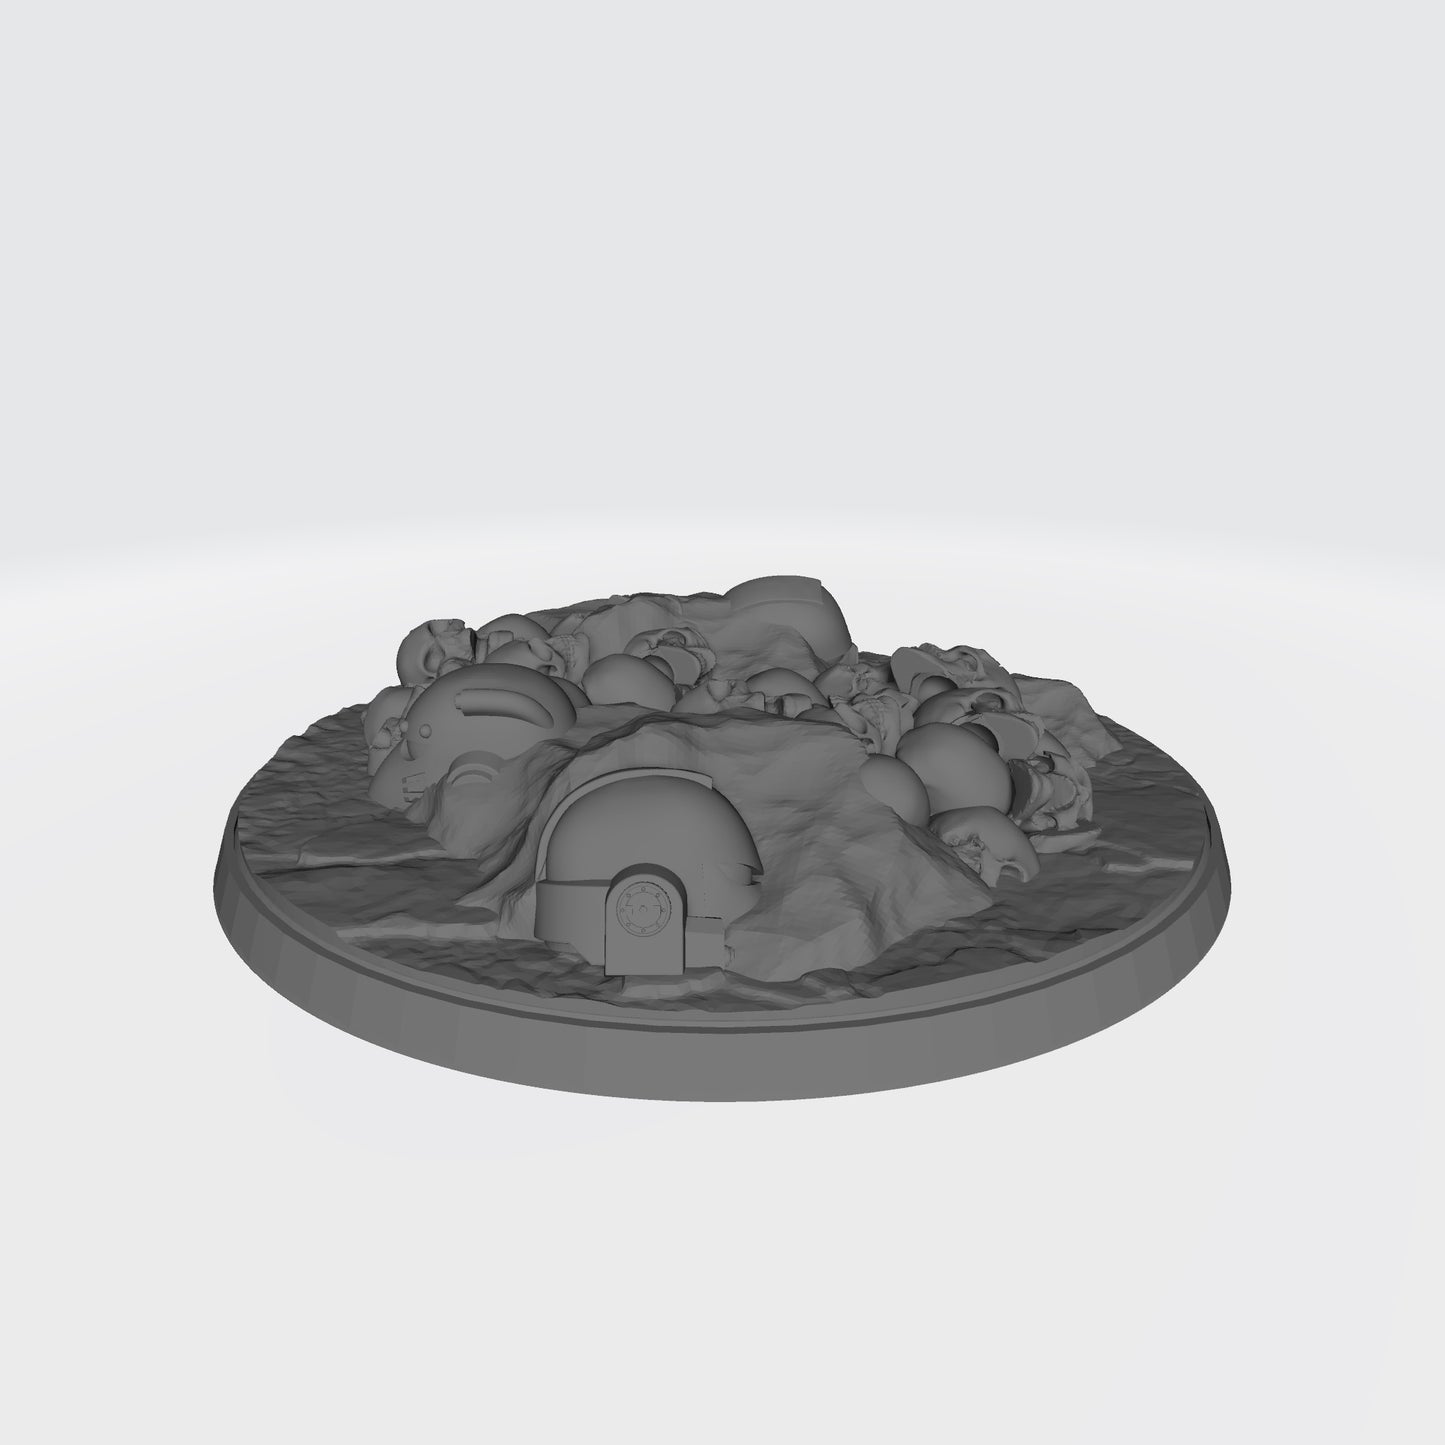 100mm Scenic Base - Desert Base with Skulls, Rocks, and Three (3) Helmets compatible with JoyToy Action Figures MKVII